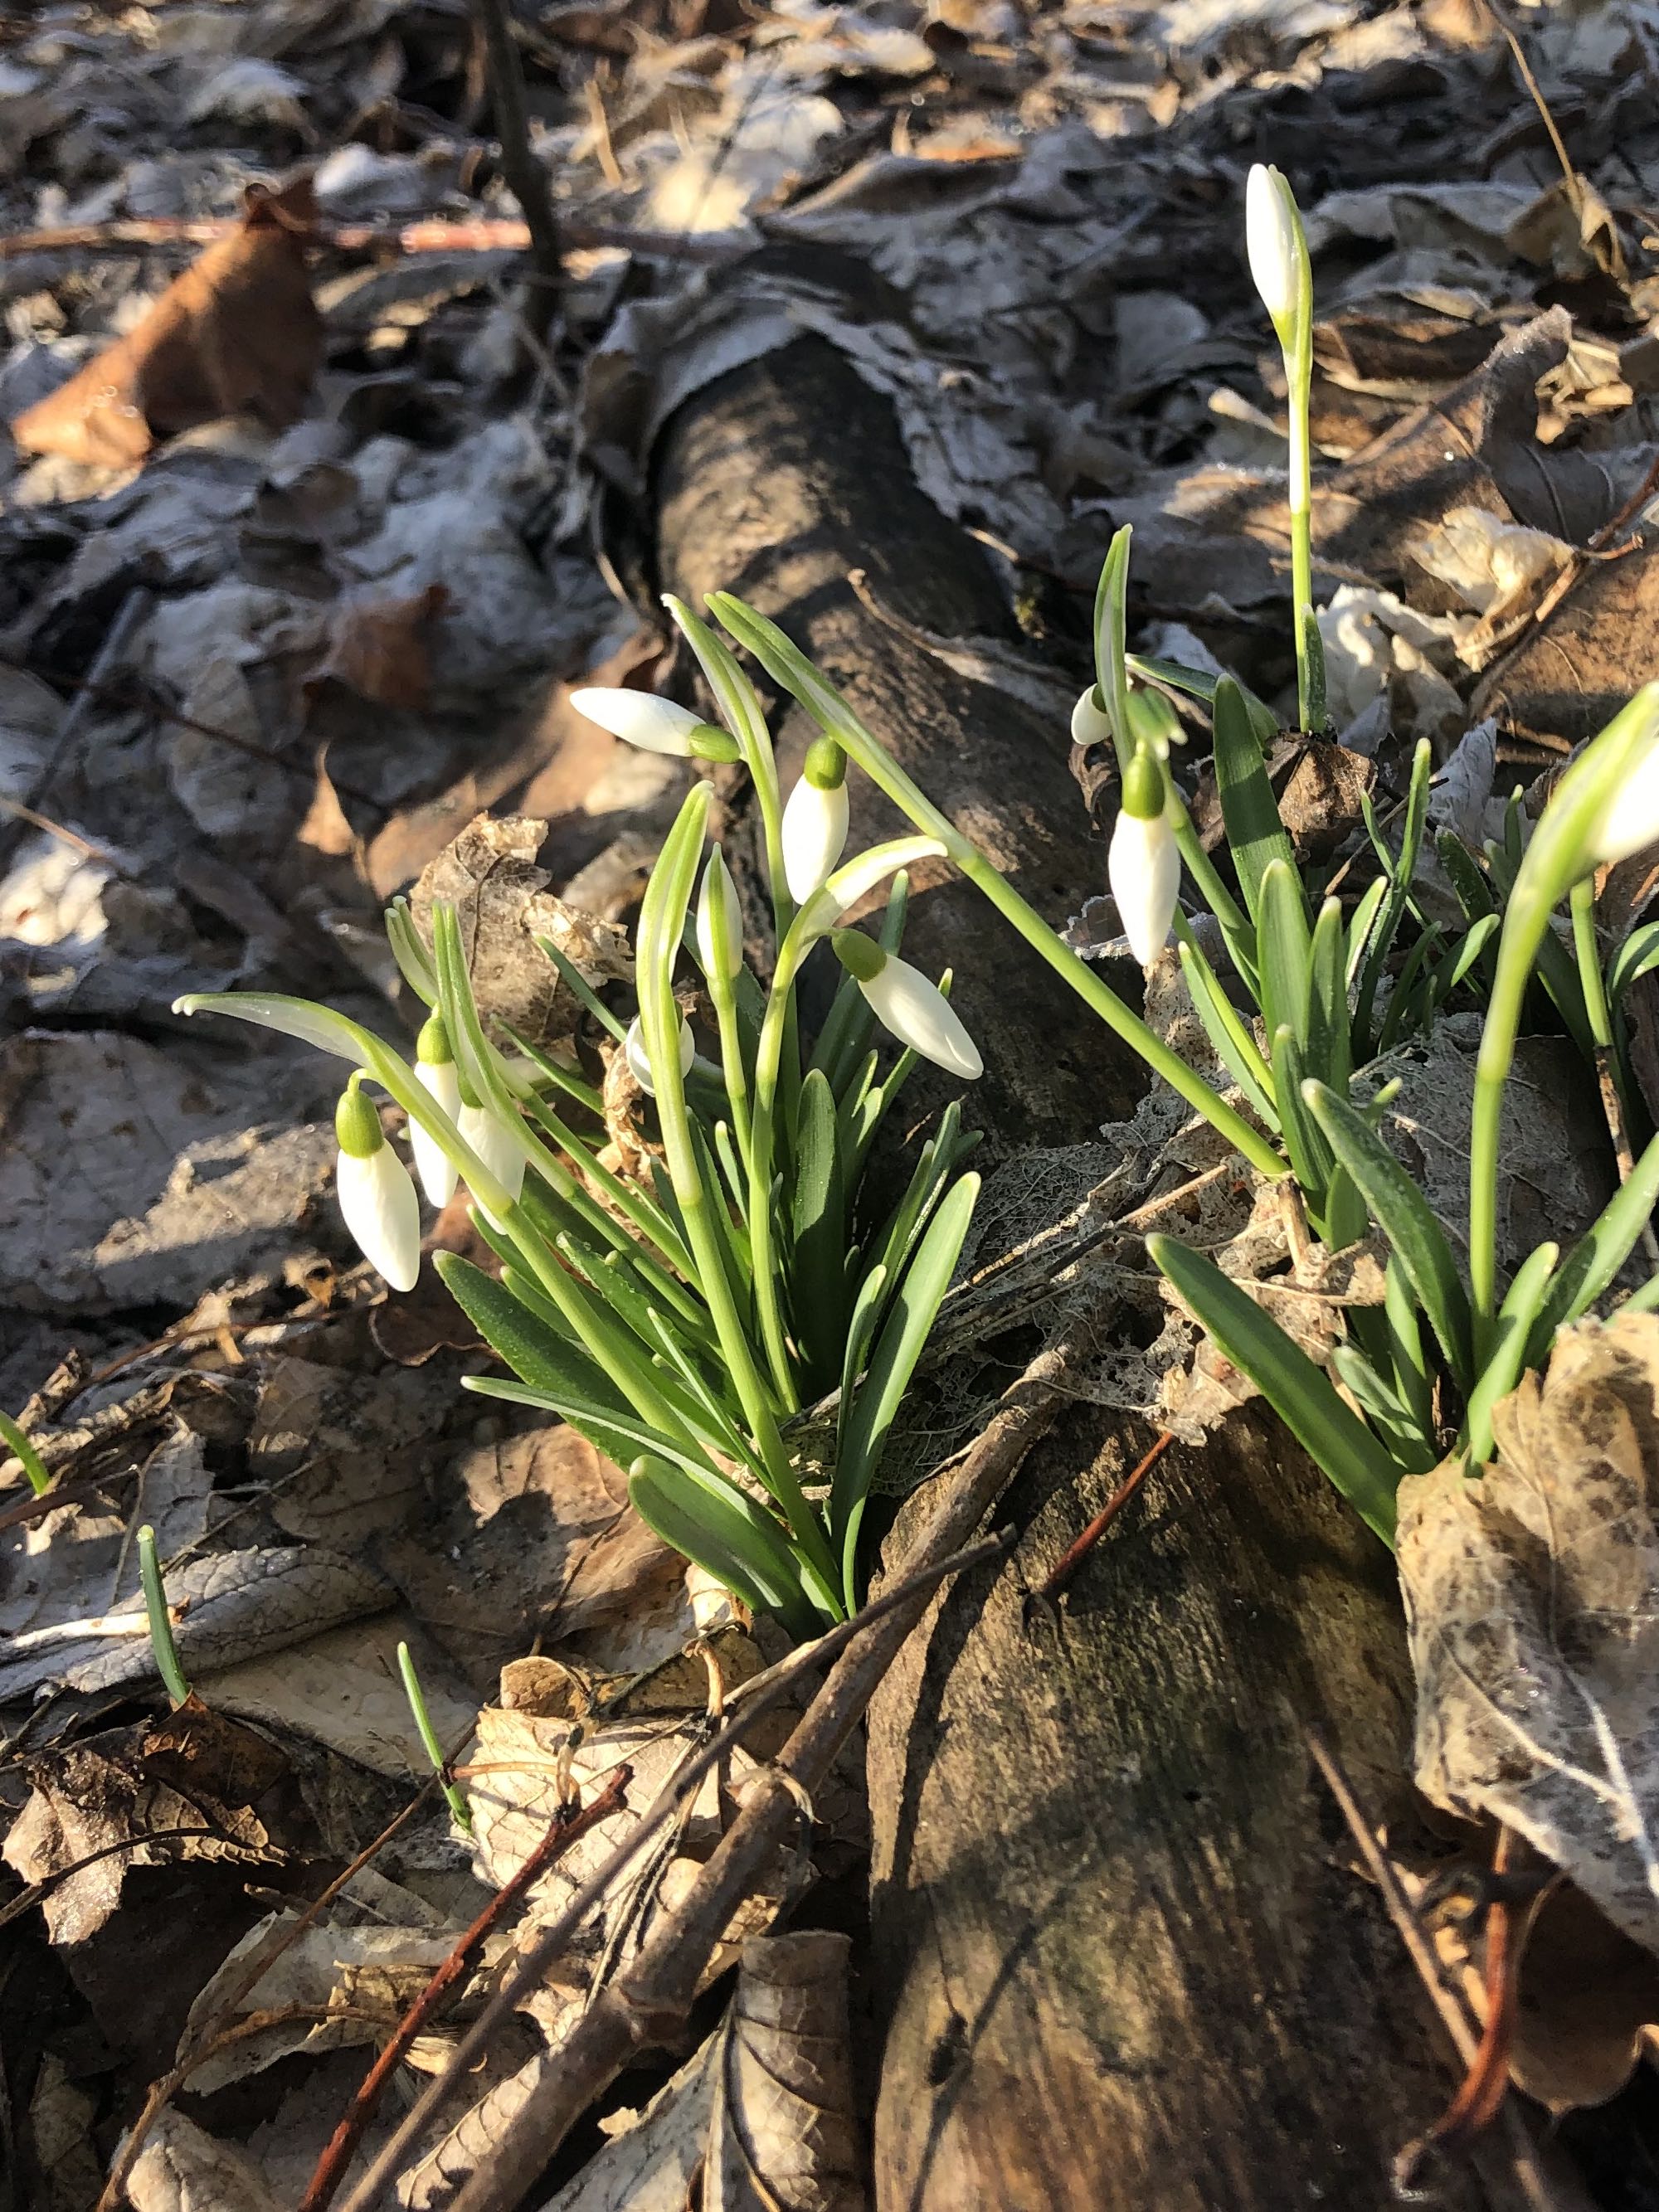 Snowdrops in Madison Wisconsin along Arbor Drive on March 4, 2023.